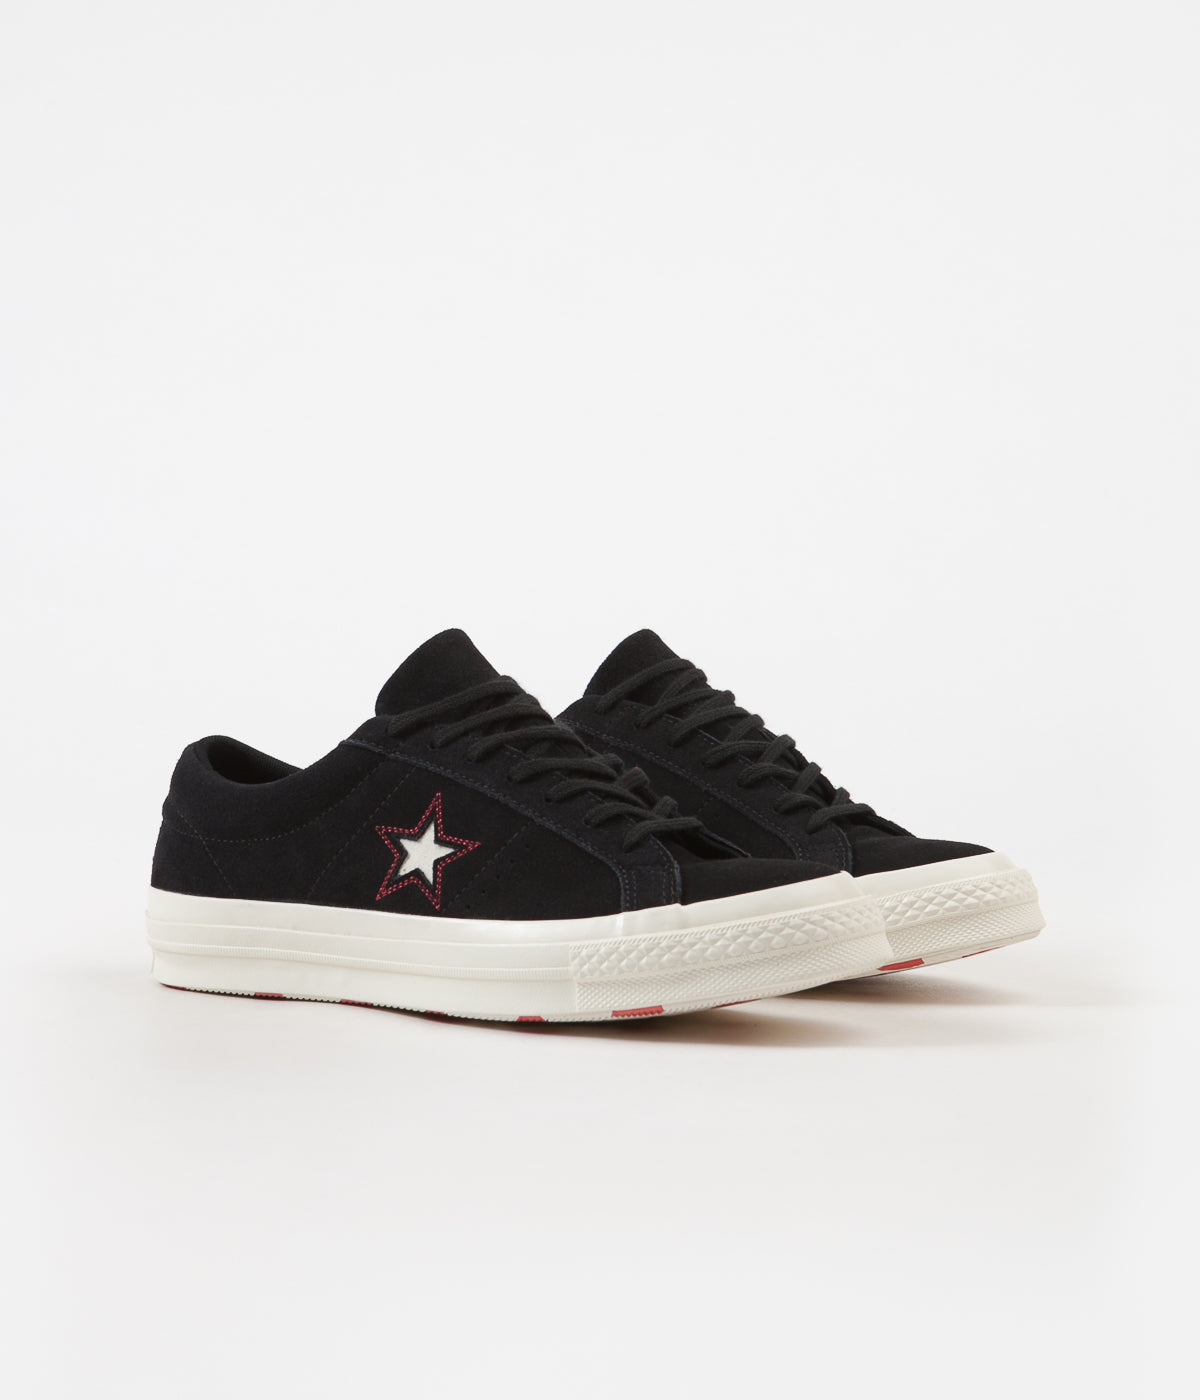 converse one star black red